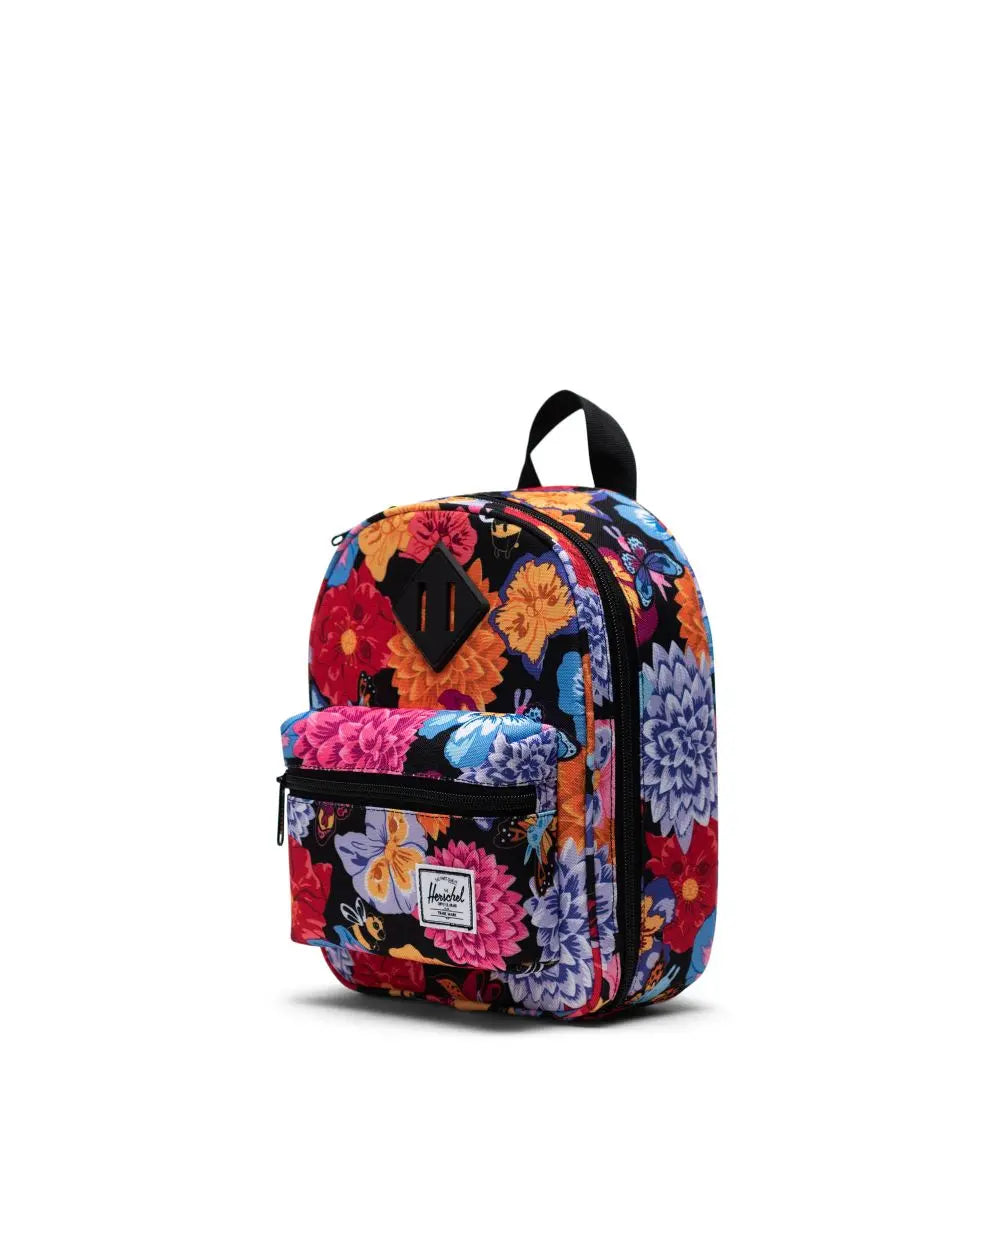 Heritage Lunch Box - Animal Flowers